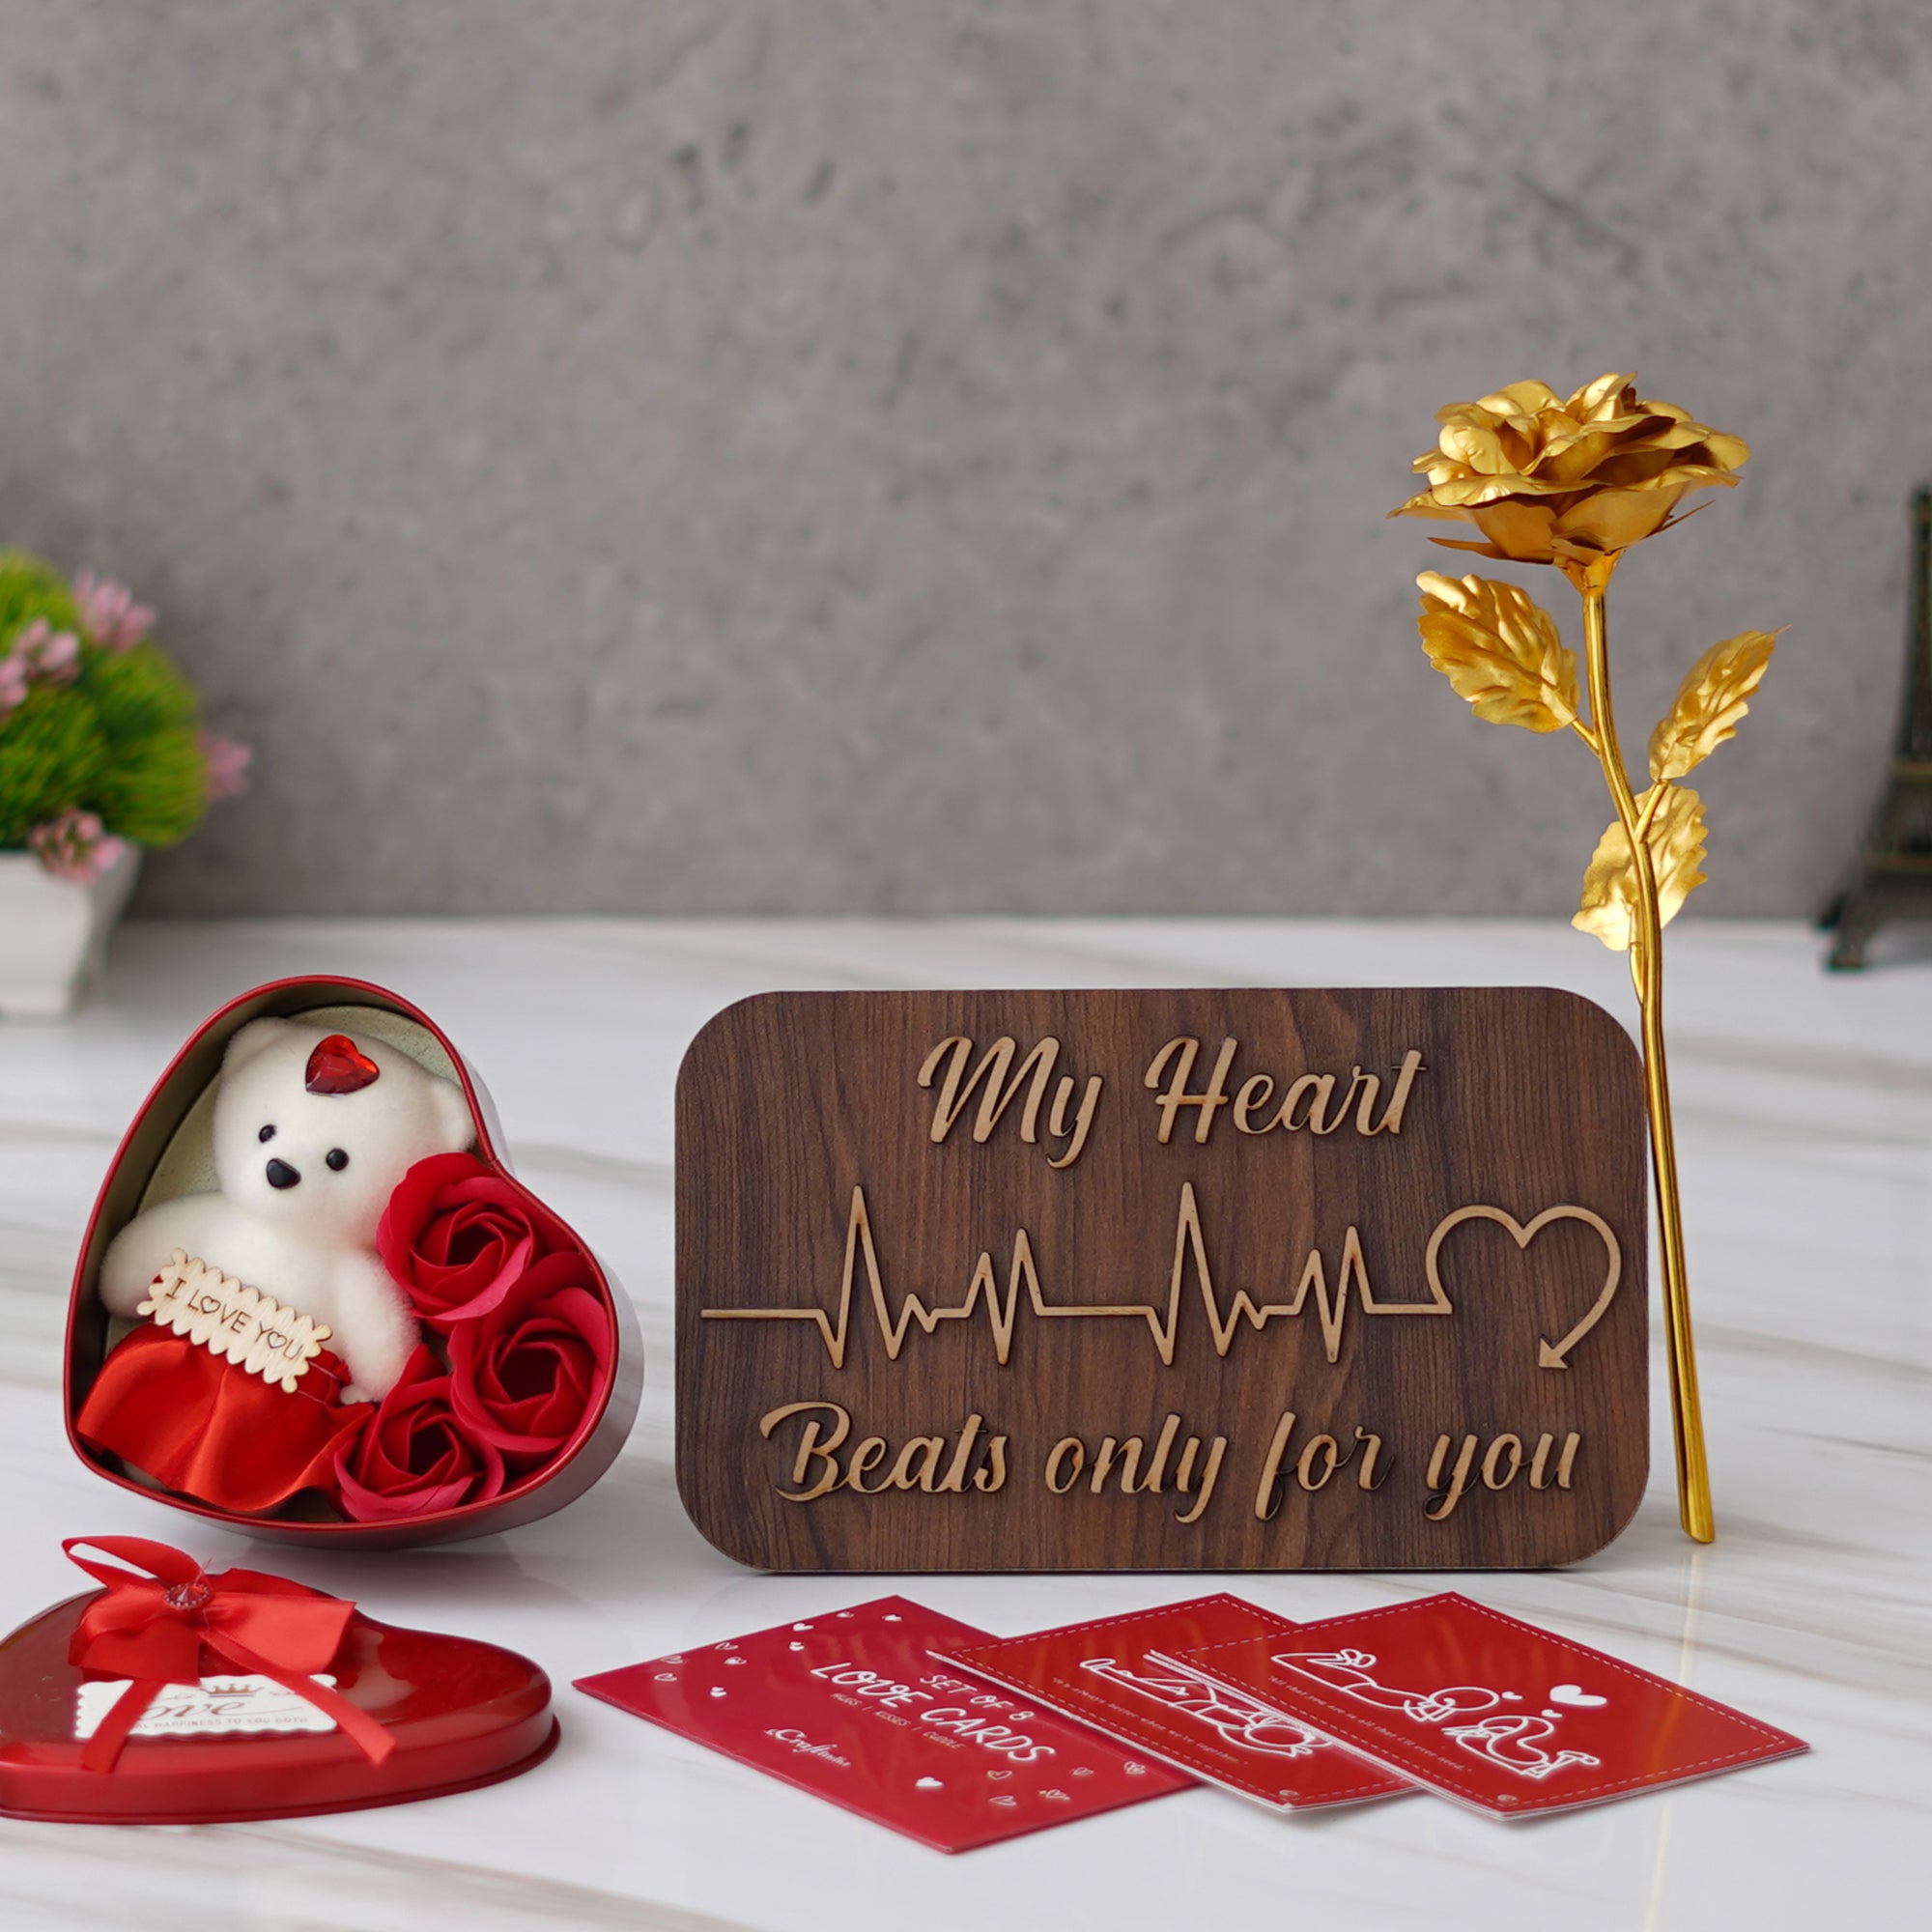 Valentine Combo of Pack of 8 Love Gift Cards, "My Heart Beats Only For You" Wooden Showpiece With Stand, Heart Shaped Gift Box Set with White Teddy and Red Roses